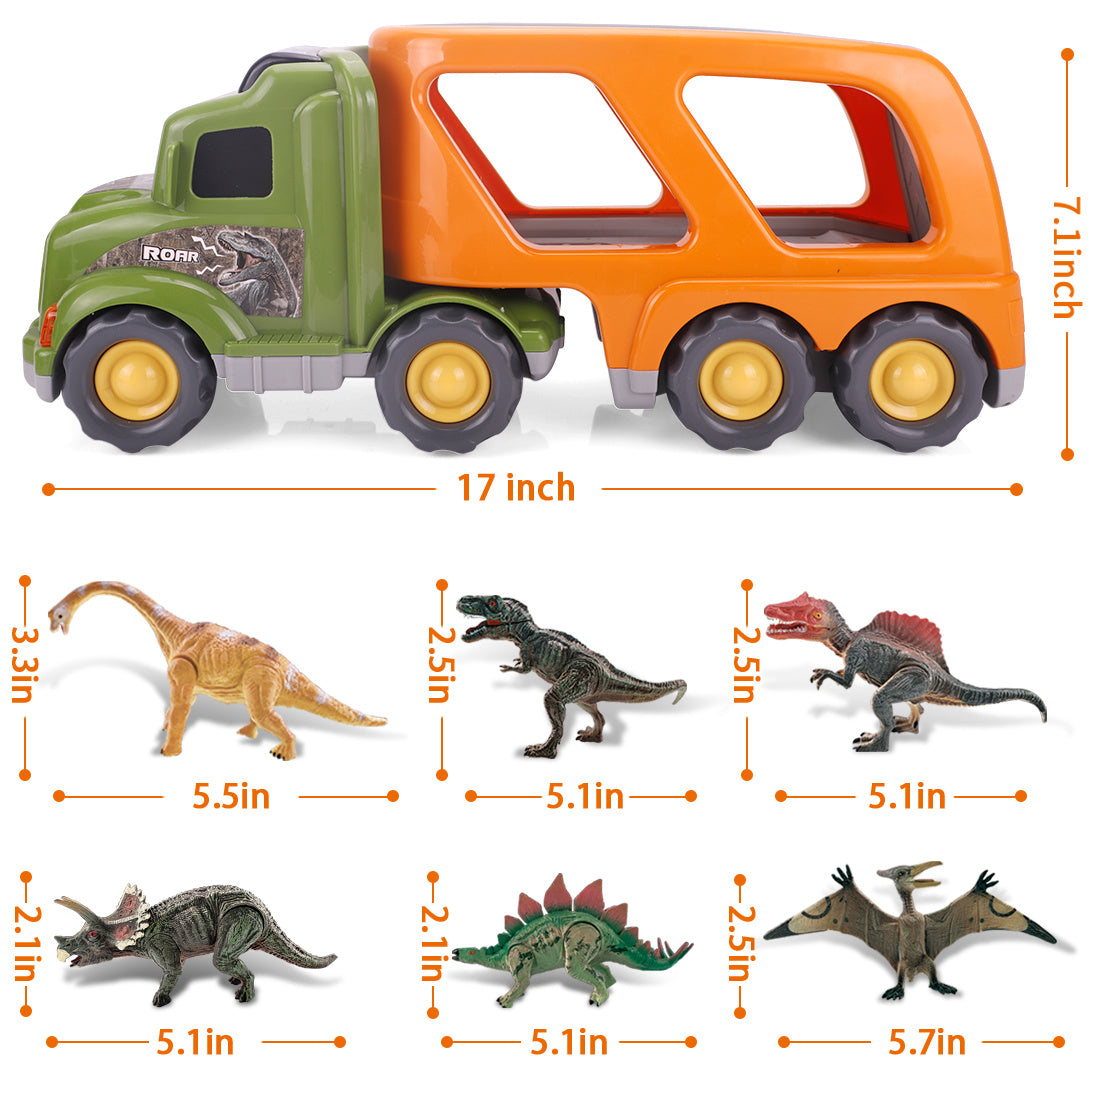 Toy Dinosaur for 2 3 4 Years Old Boys and Girls;  Car Transport Truck with Sound and Light;  6 Pack of 5'' Dinosaur Toys;  Educational Realistic Dinosaur Play Set